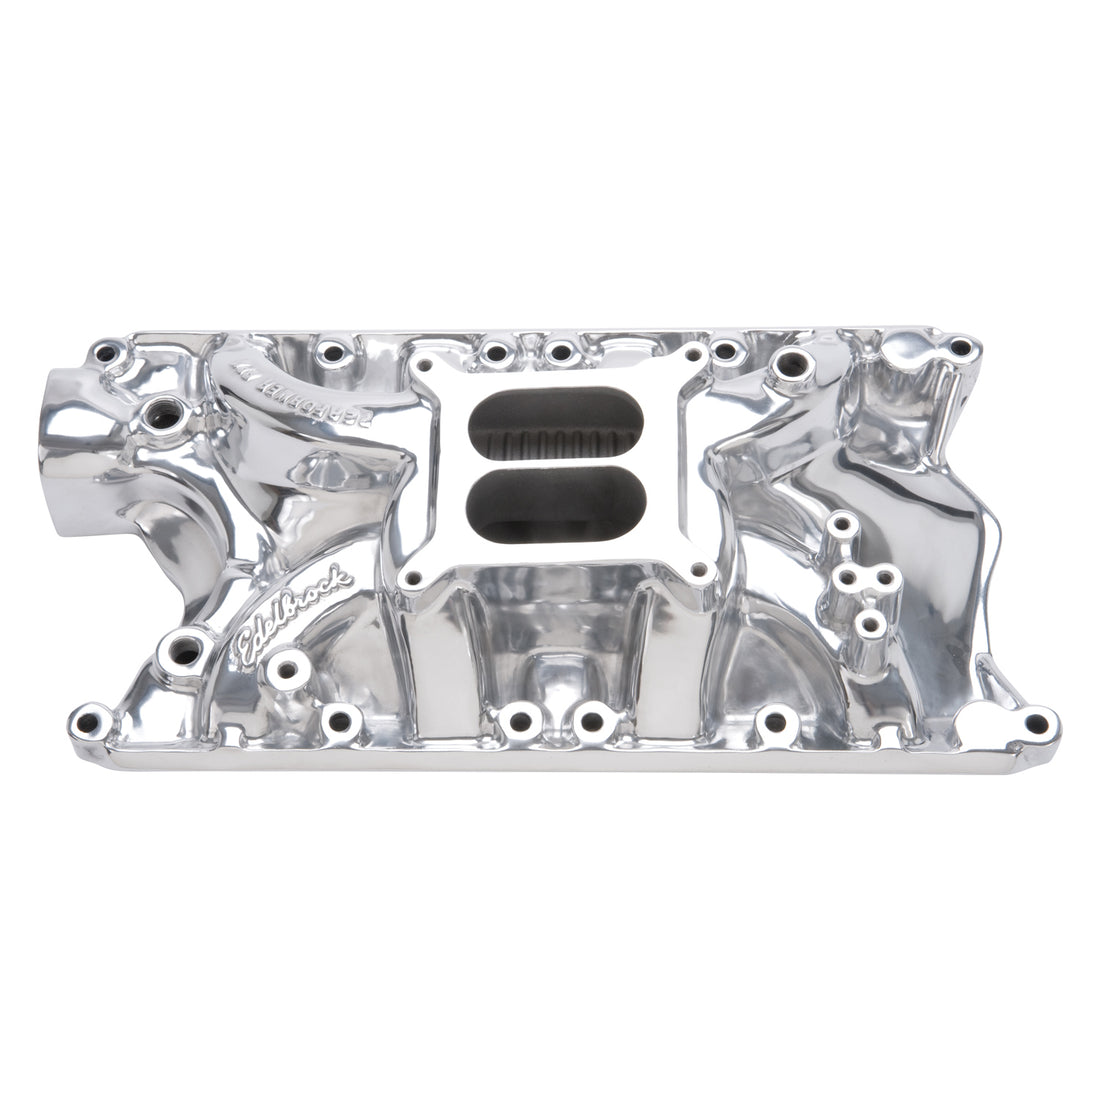 Performer RPM Small Block Ford 351W Polished Intake Manifold Edelbrock